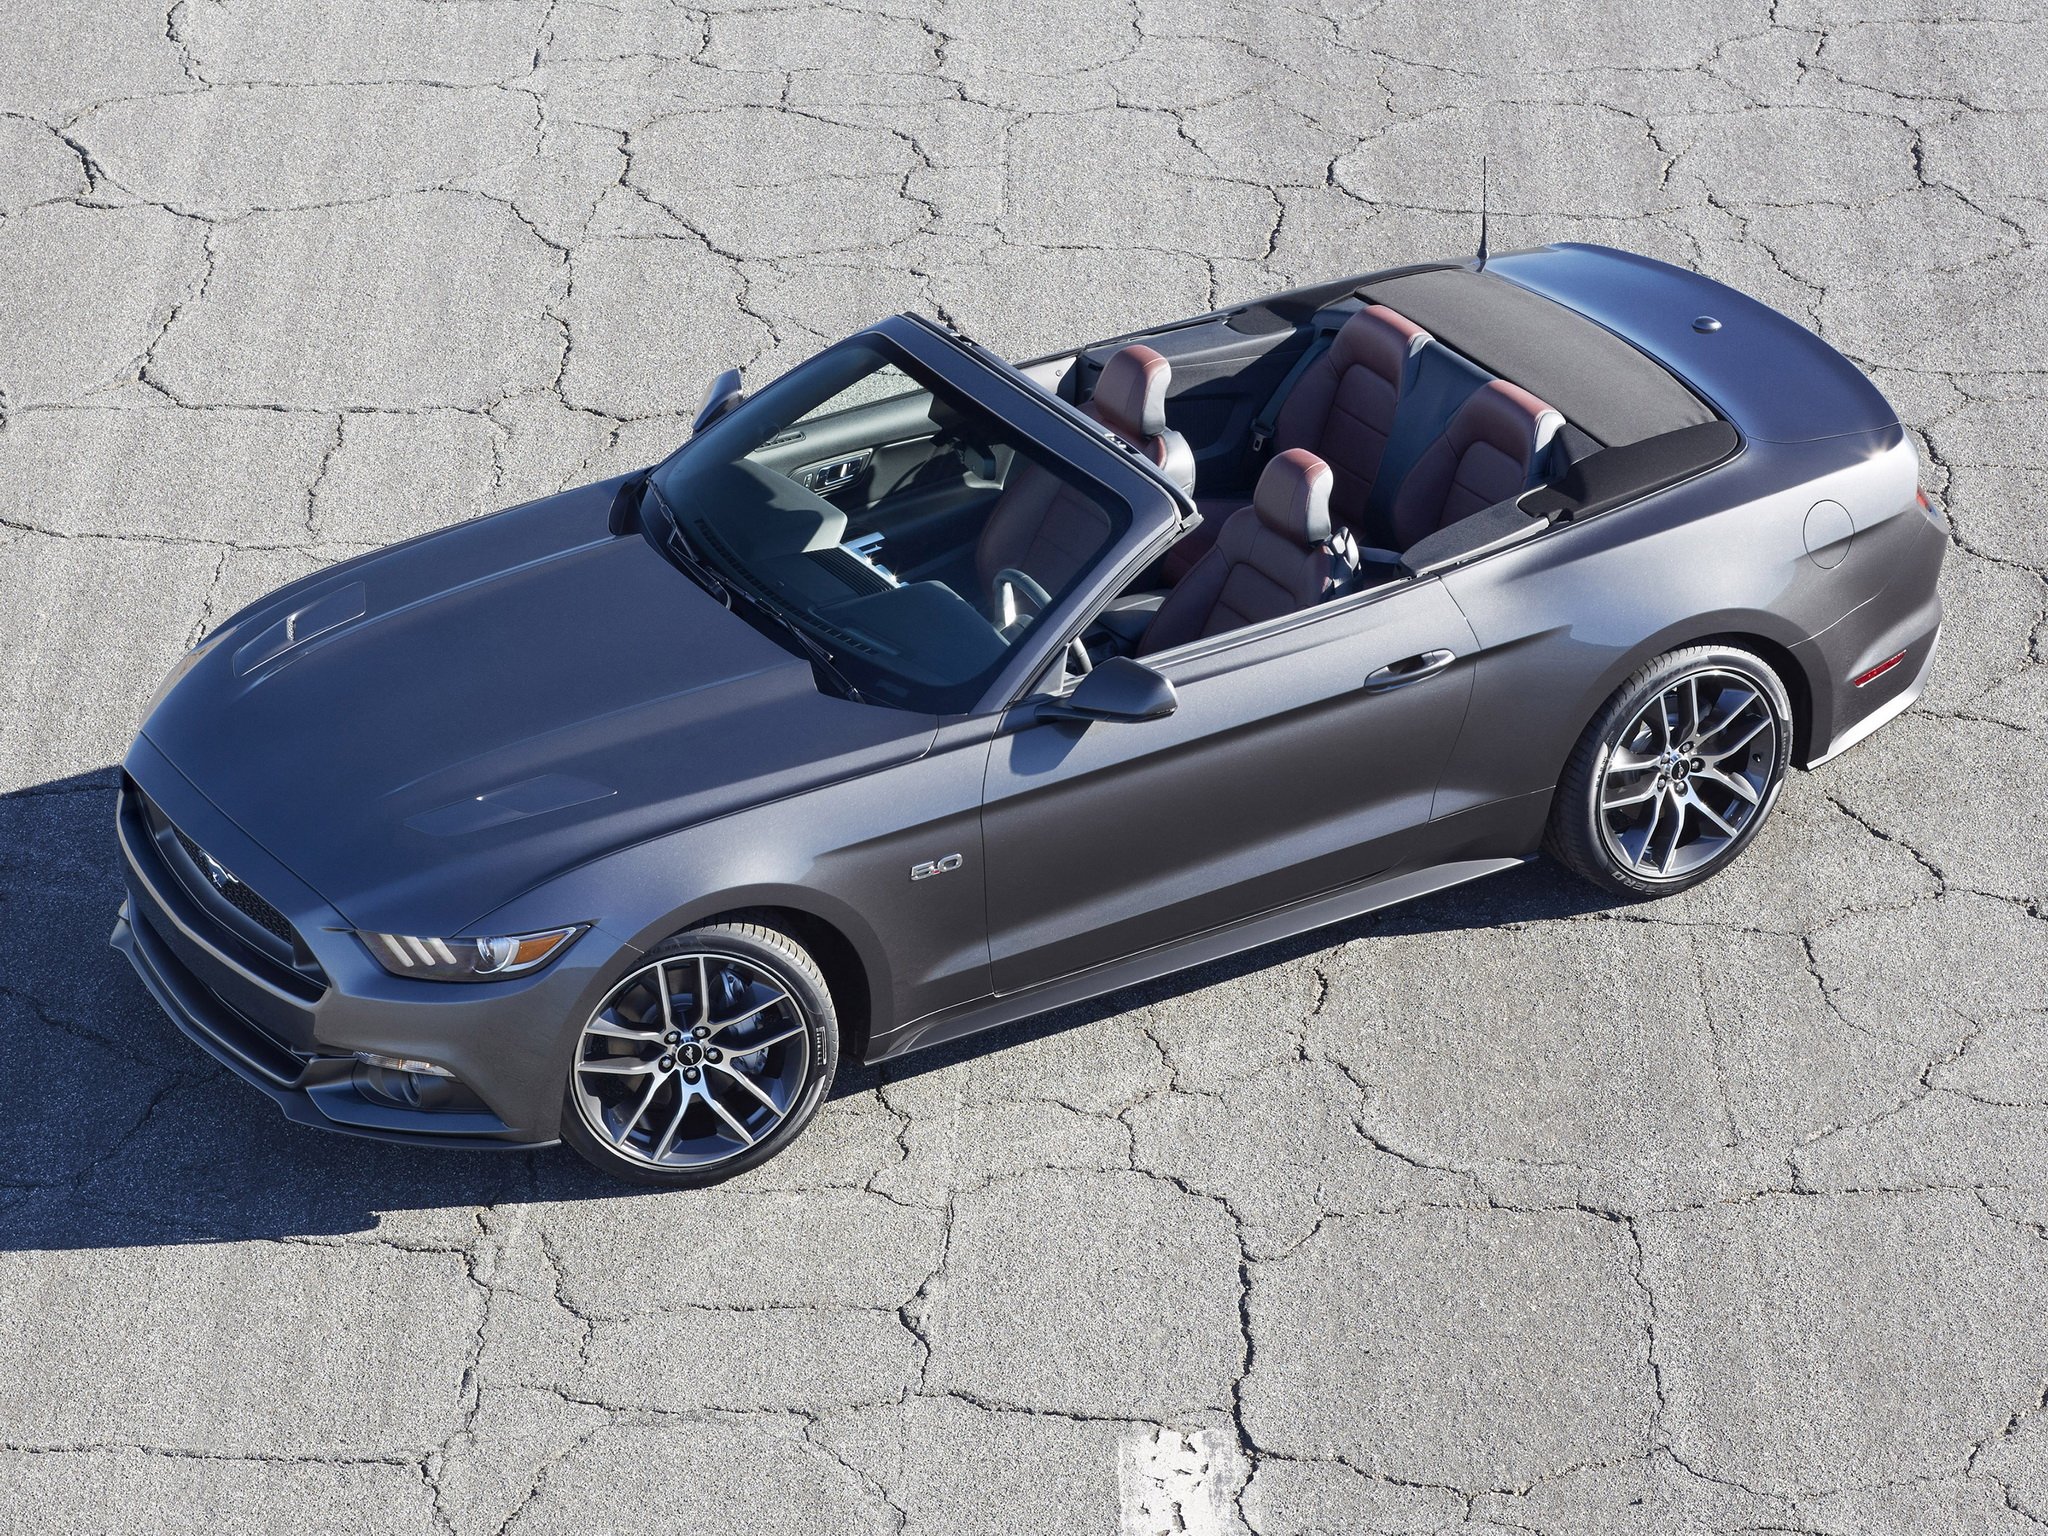 2014, Ford, Mustang, G t, Convertible, Muscle, Interior, Gf Wallpaper